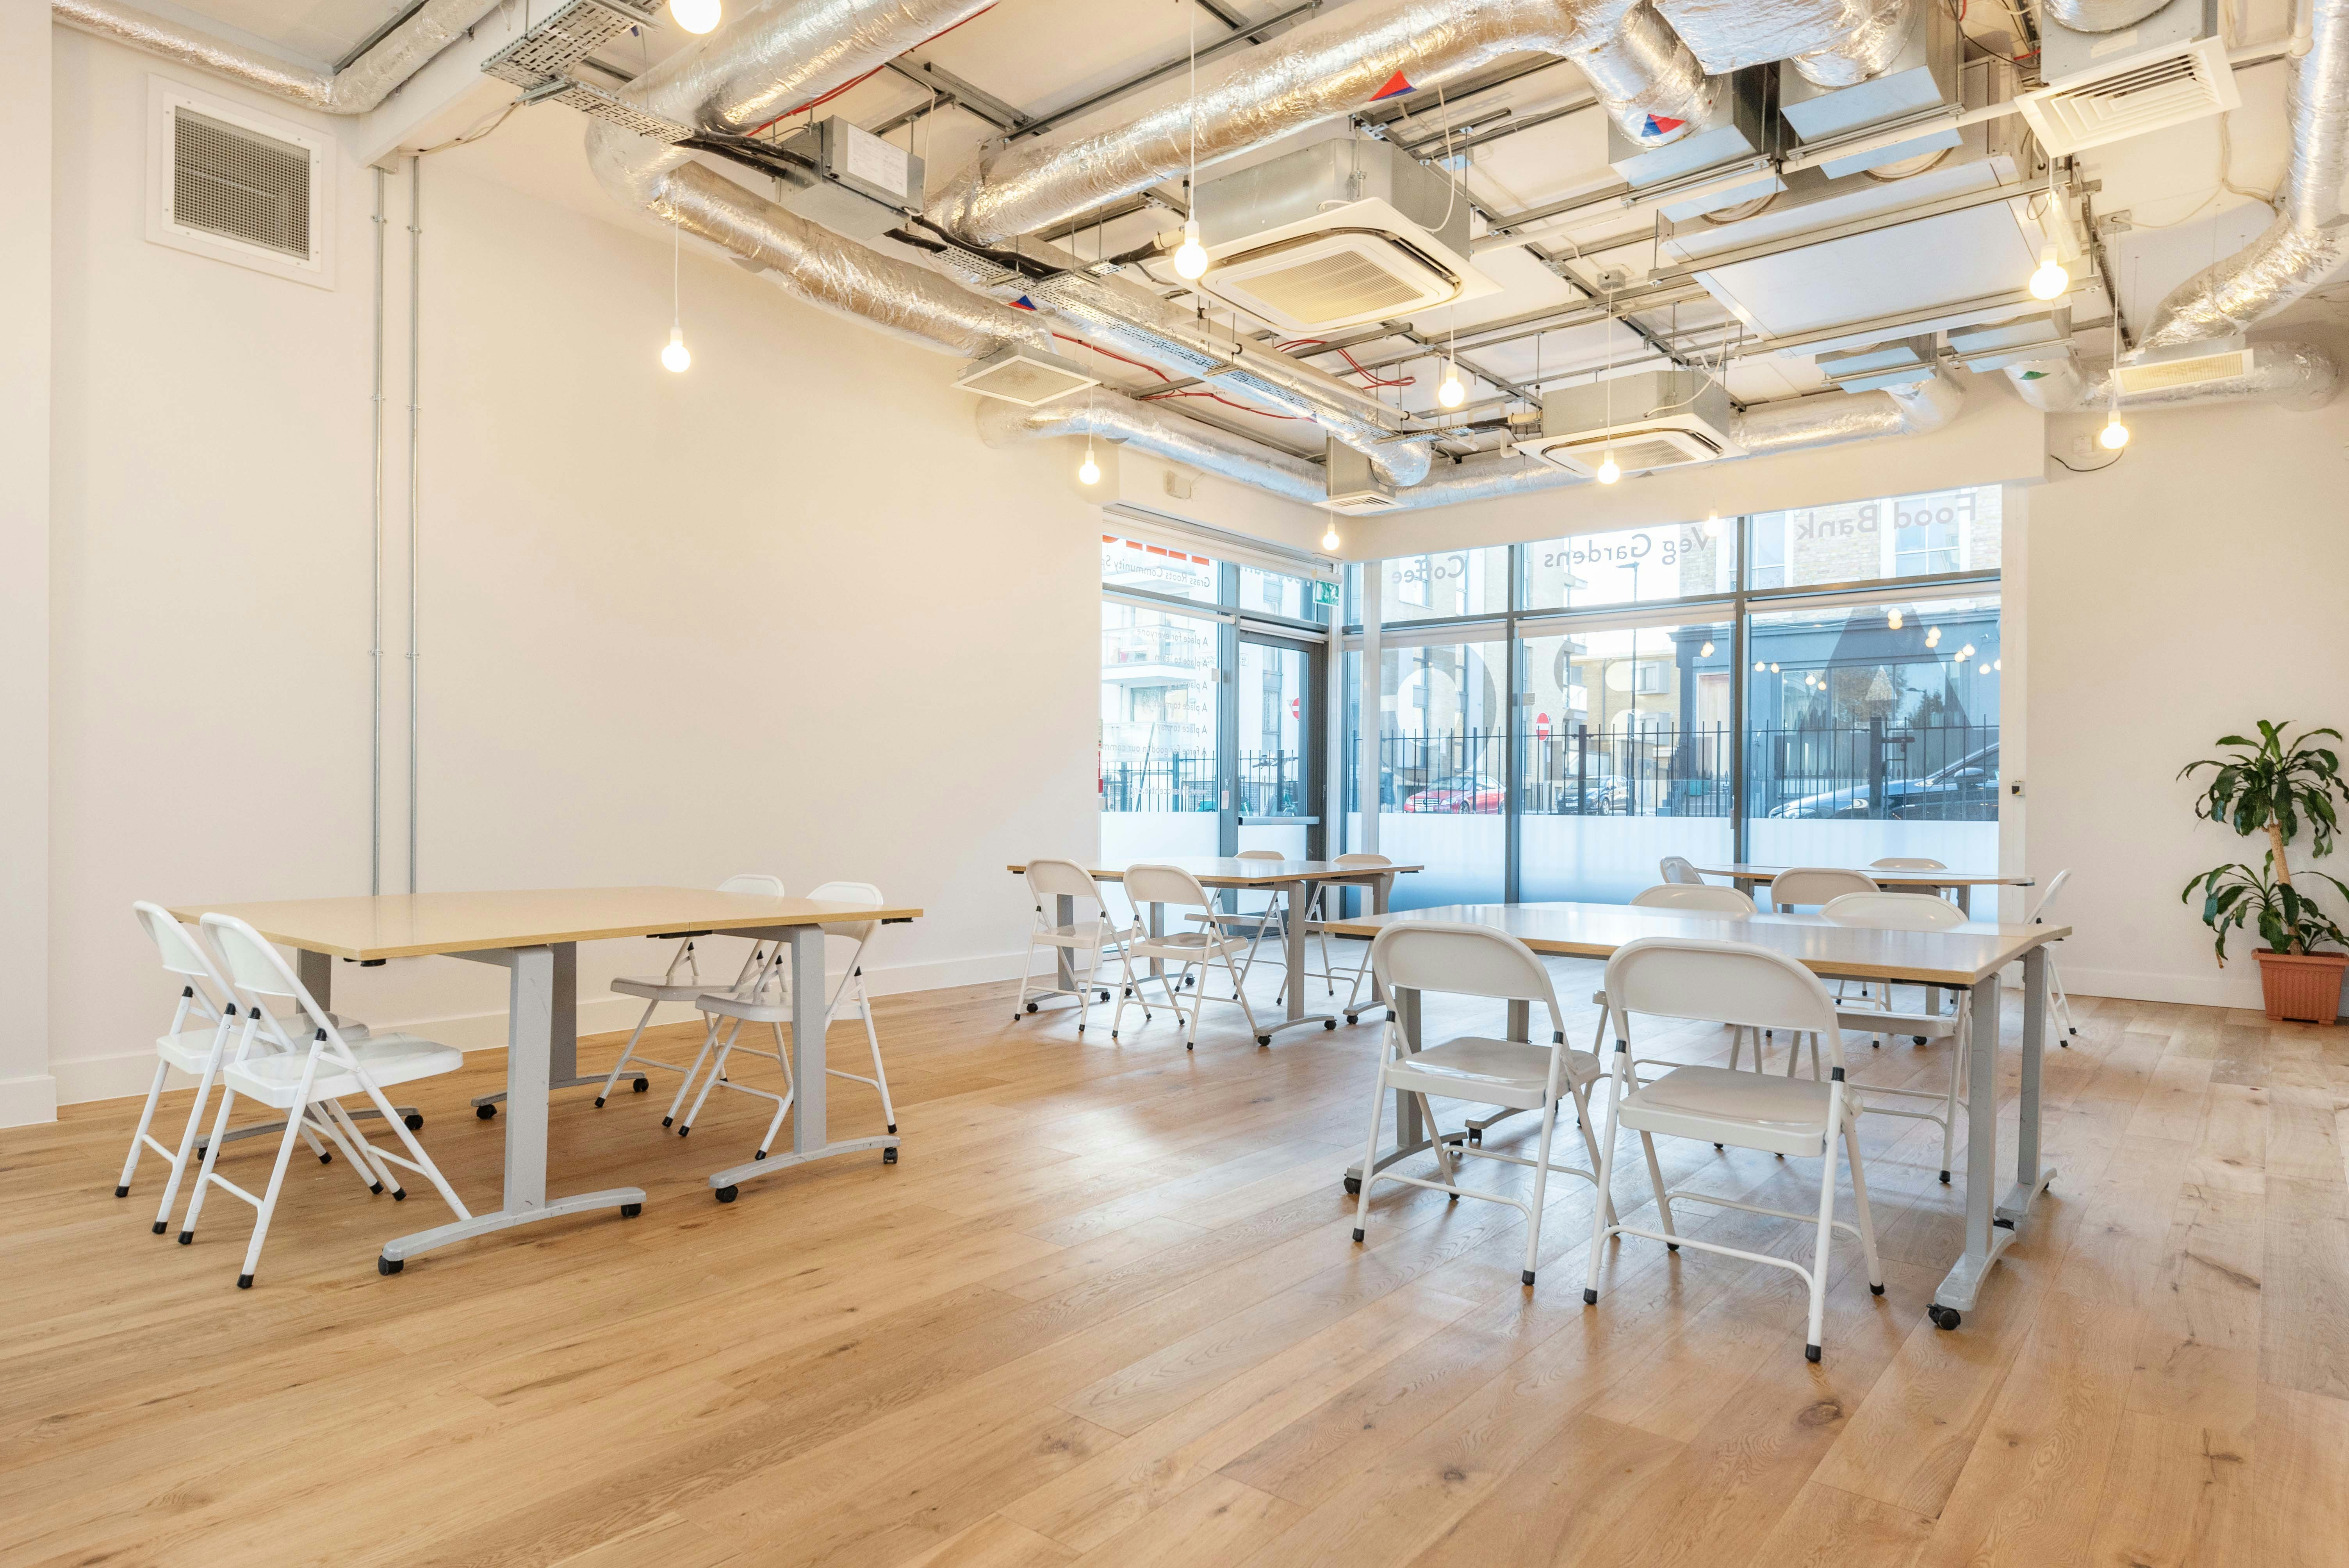 Meeting Rooms Venues in Islington - The Arc Centre, Islington